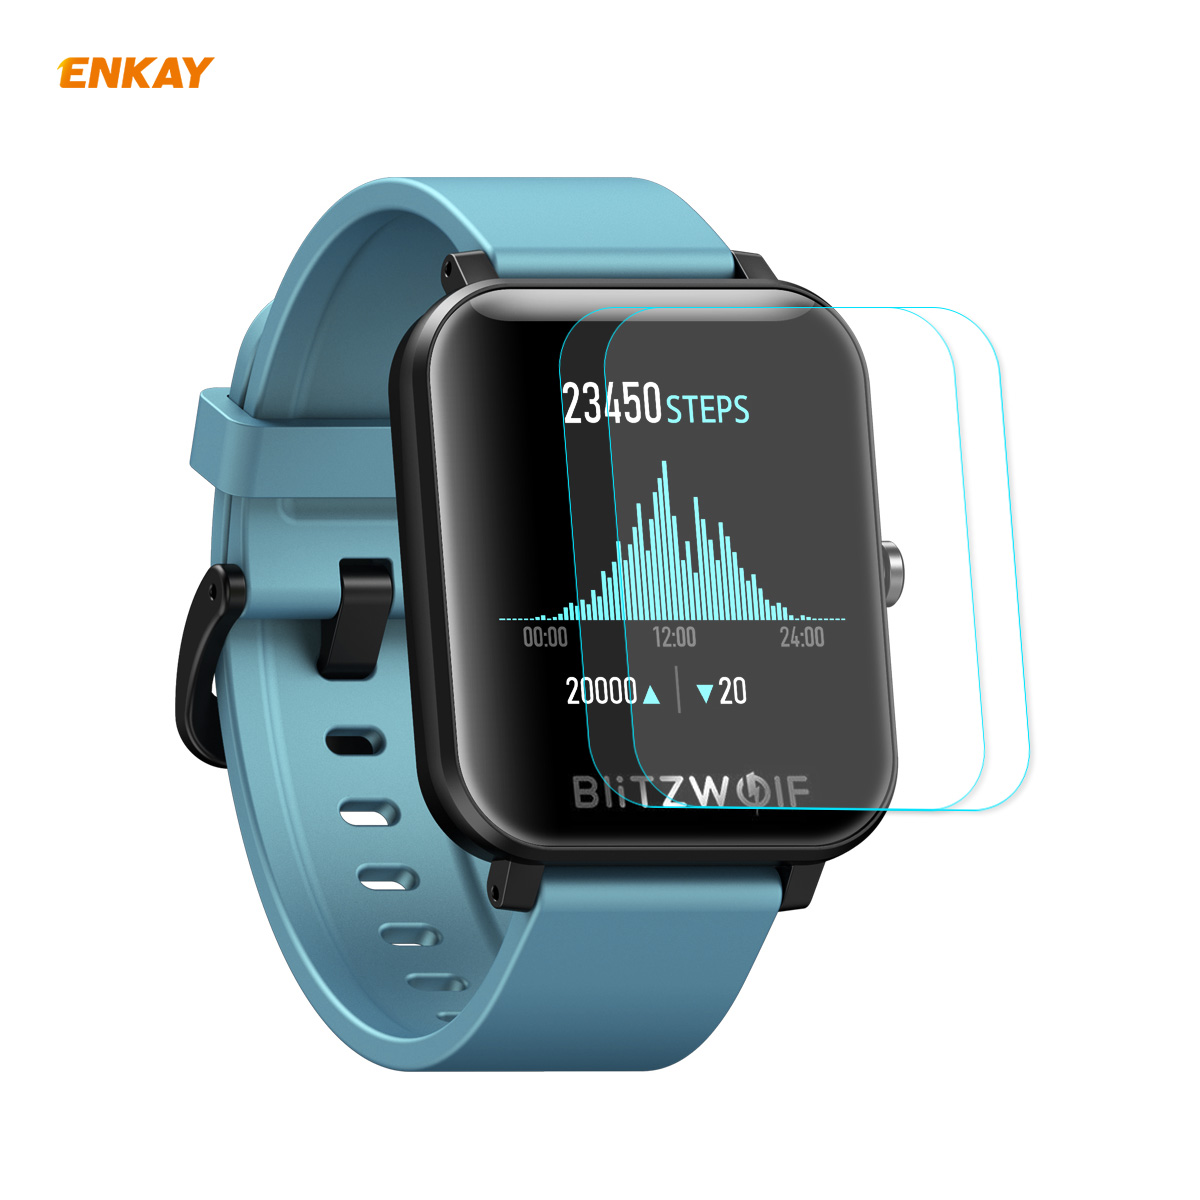 ENKAY-02mm-9H-215D-Are-Edge-Tempered-Glass-Protective-Film-Watch-Screen-Protector-only-for-BlitzWolf-1789630-7